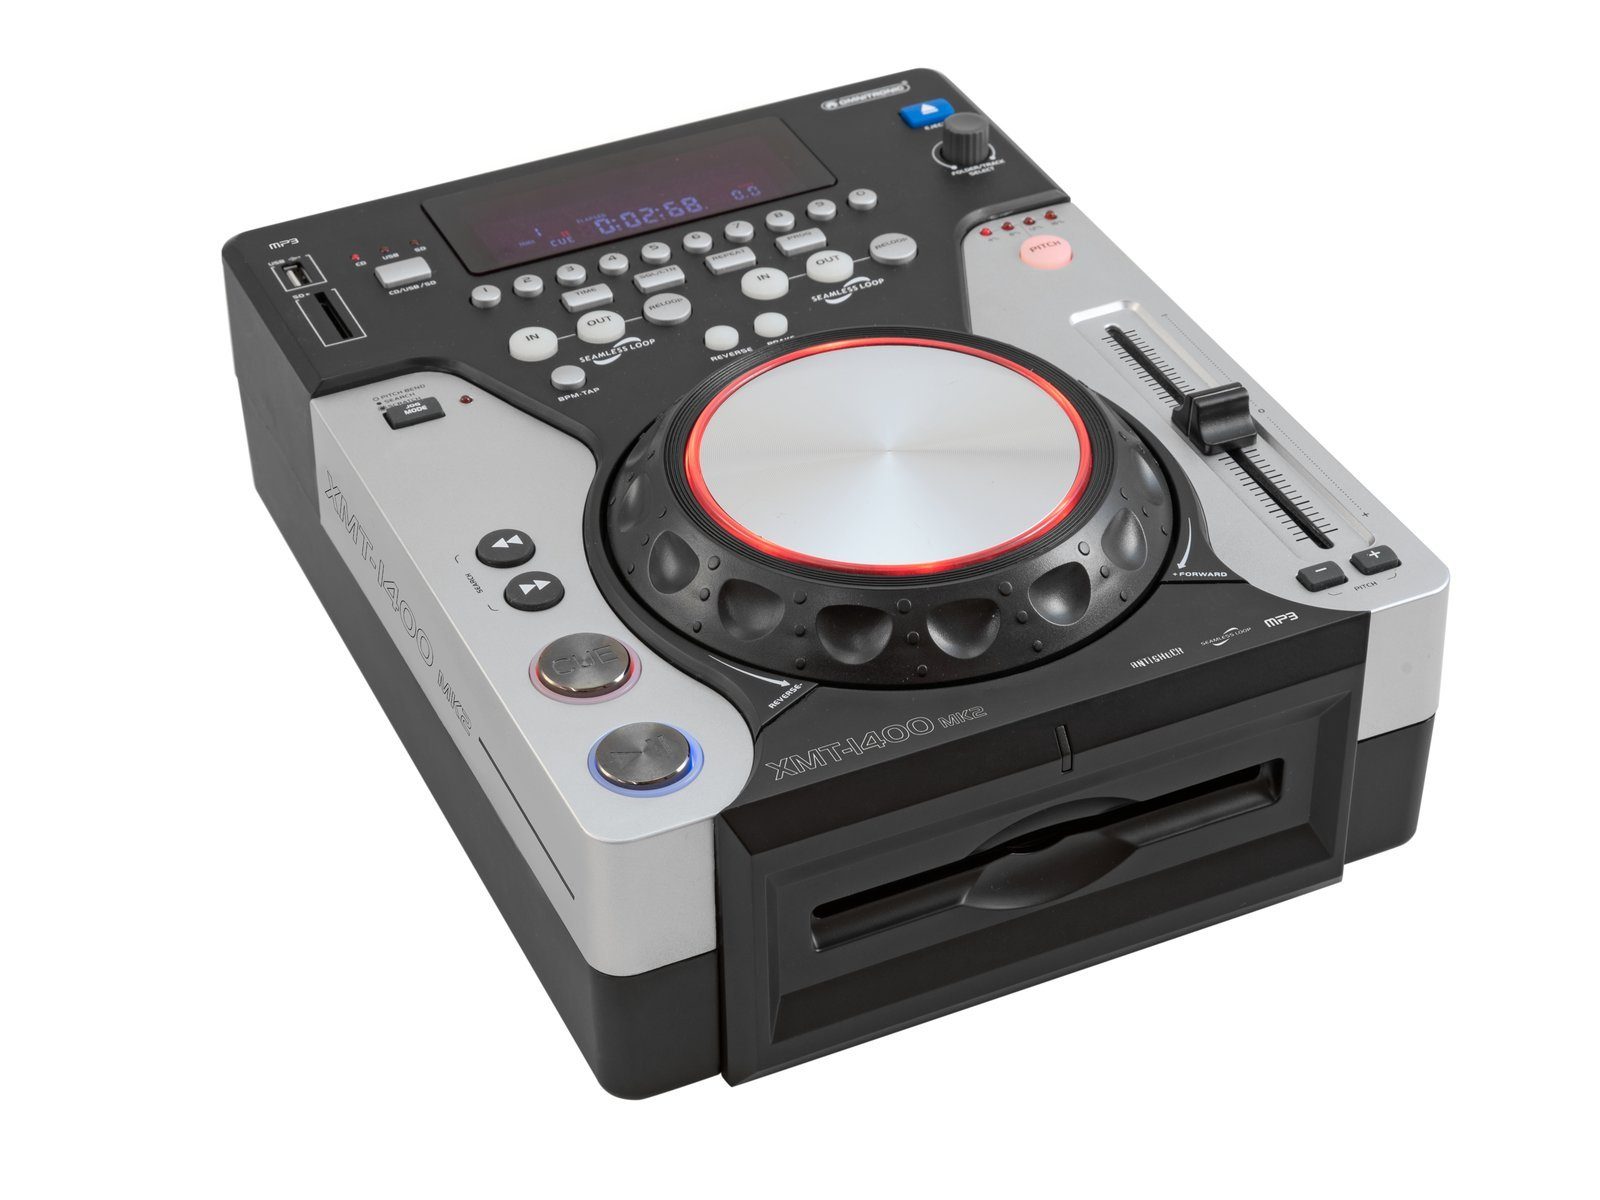 Omnitronic Tabletop-CD-Player XMT-1400 MK2 Player Stereo-CD